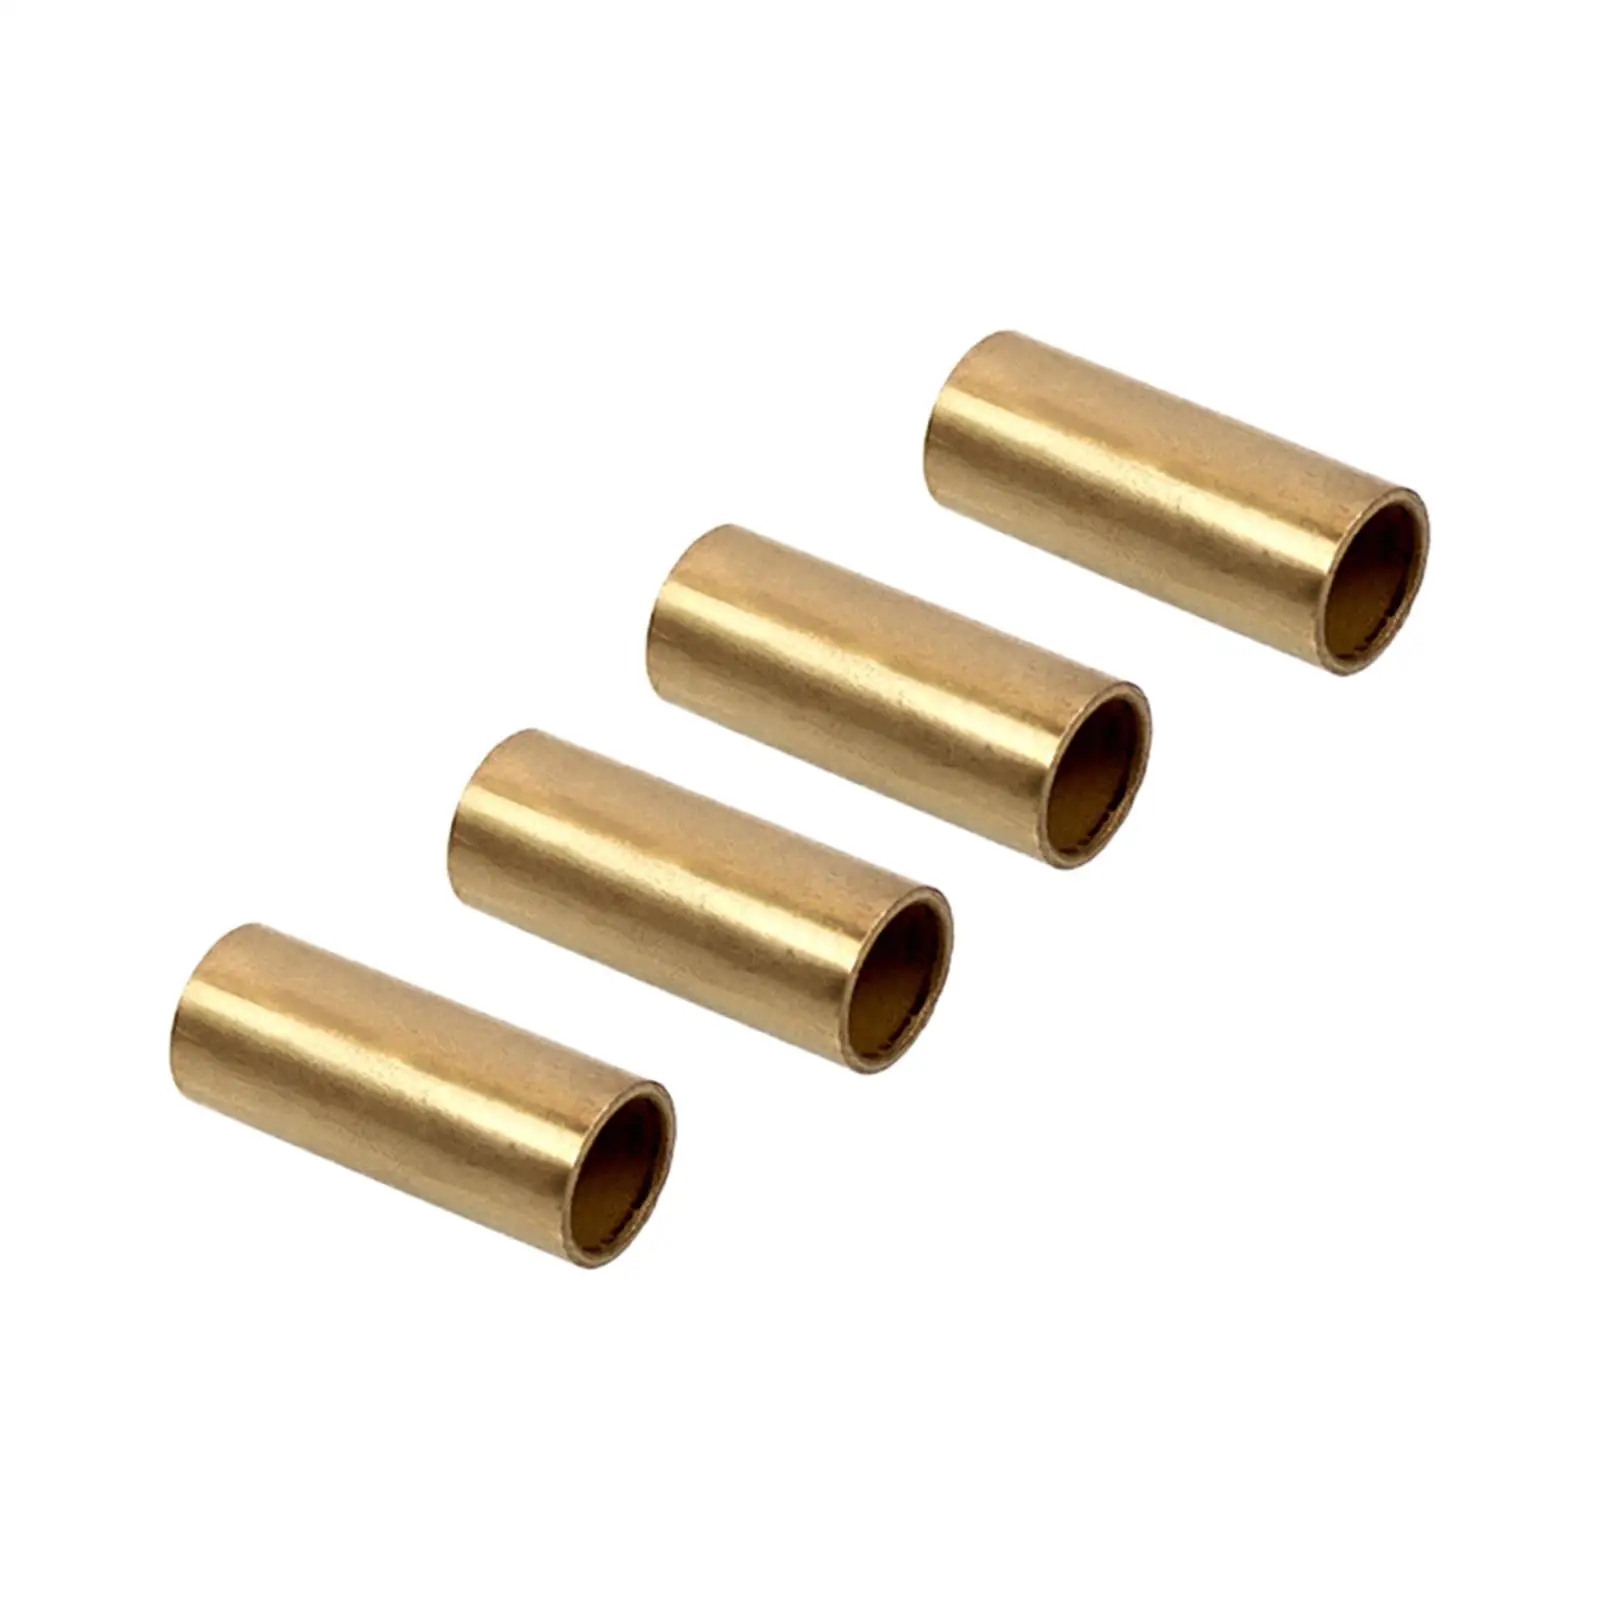 4x Bronze Leaf Spring Bushing Kit K7129100 Accessories Durable Parts Direct Replaces